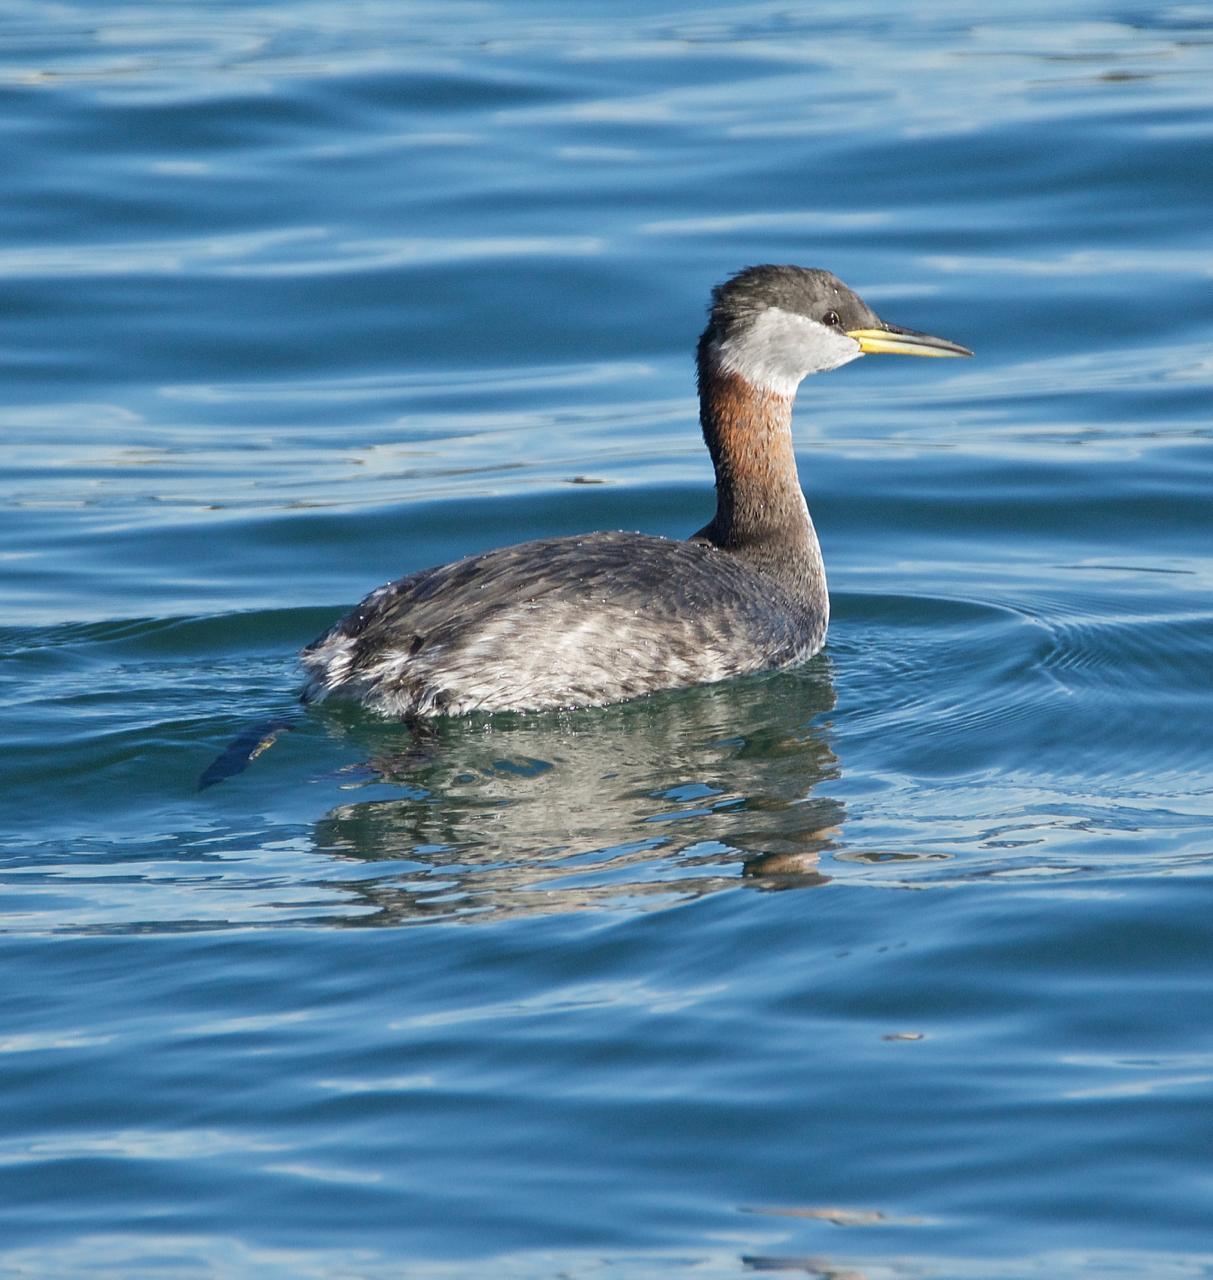 Red-necked Grebe Photo by Brian Avent